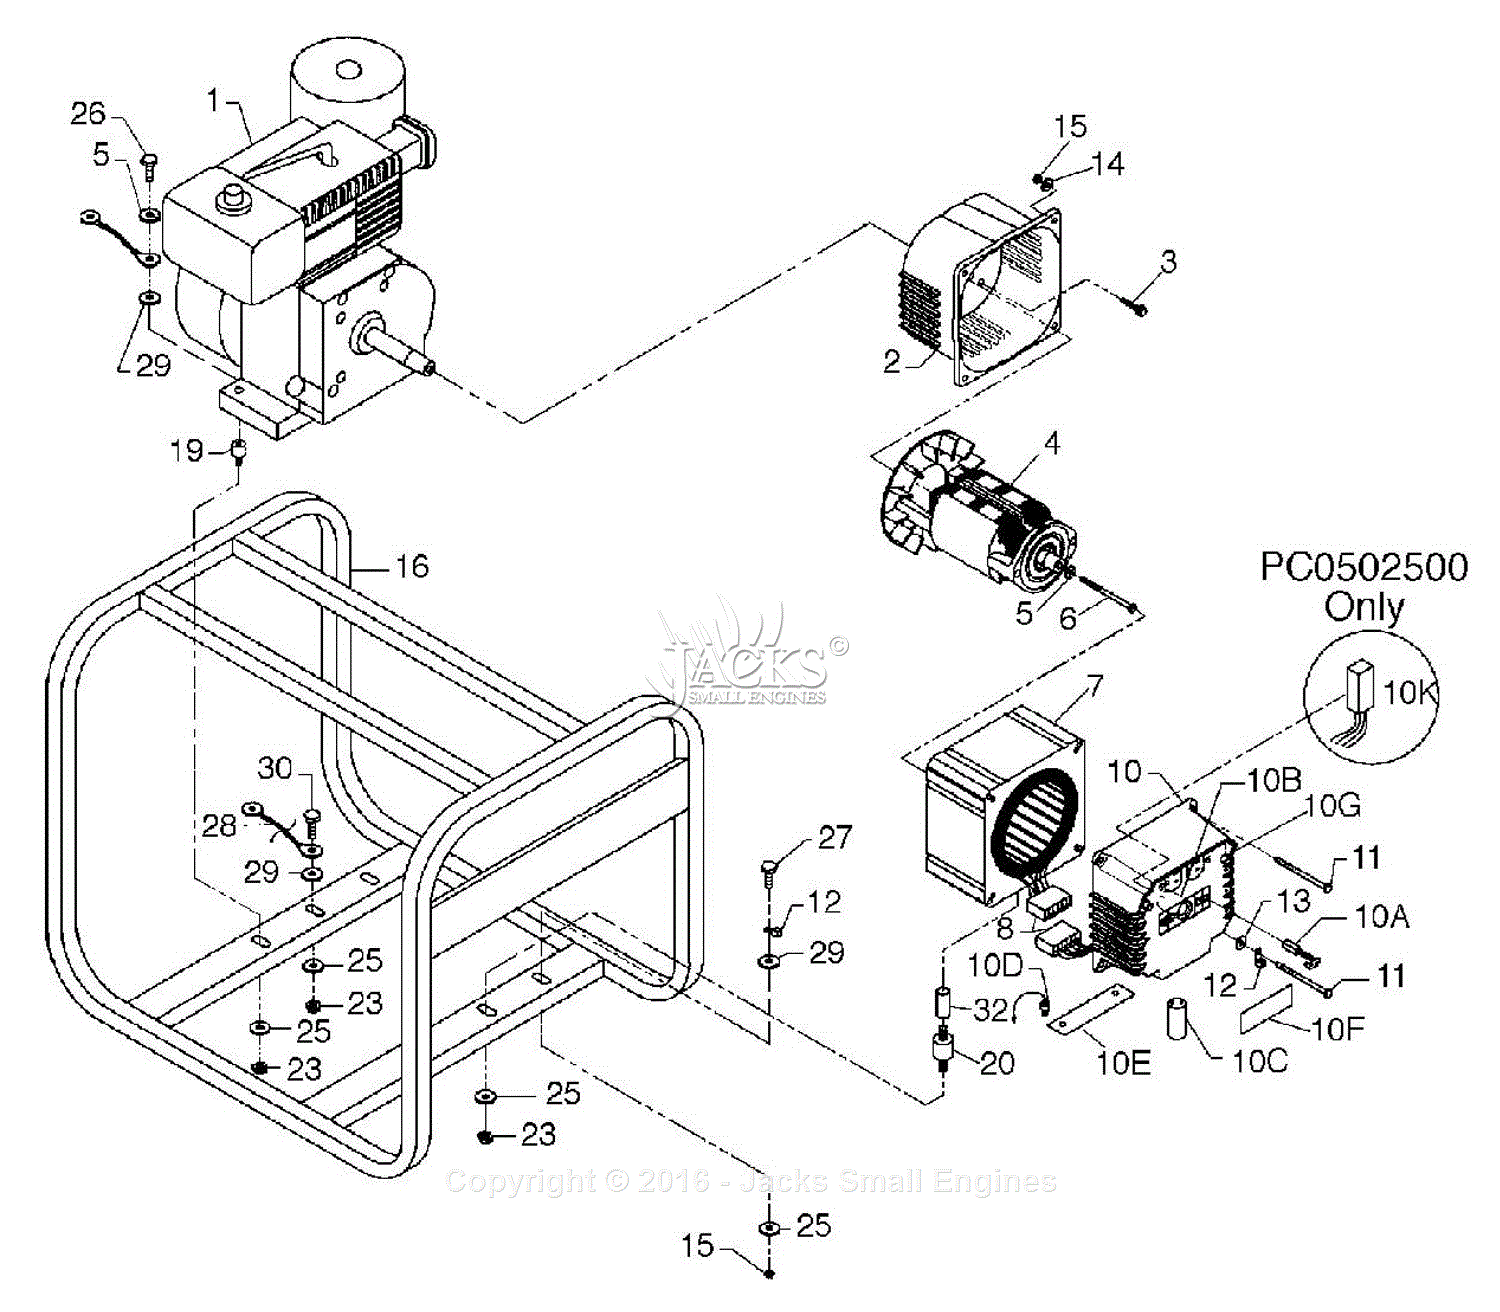 Powermate Formerly Coleman Pm0502500 Parts Diagram For